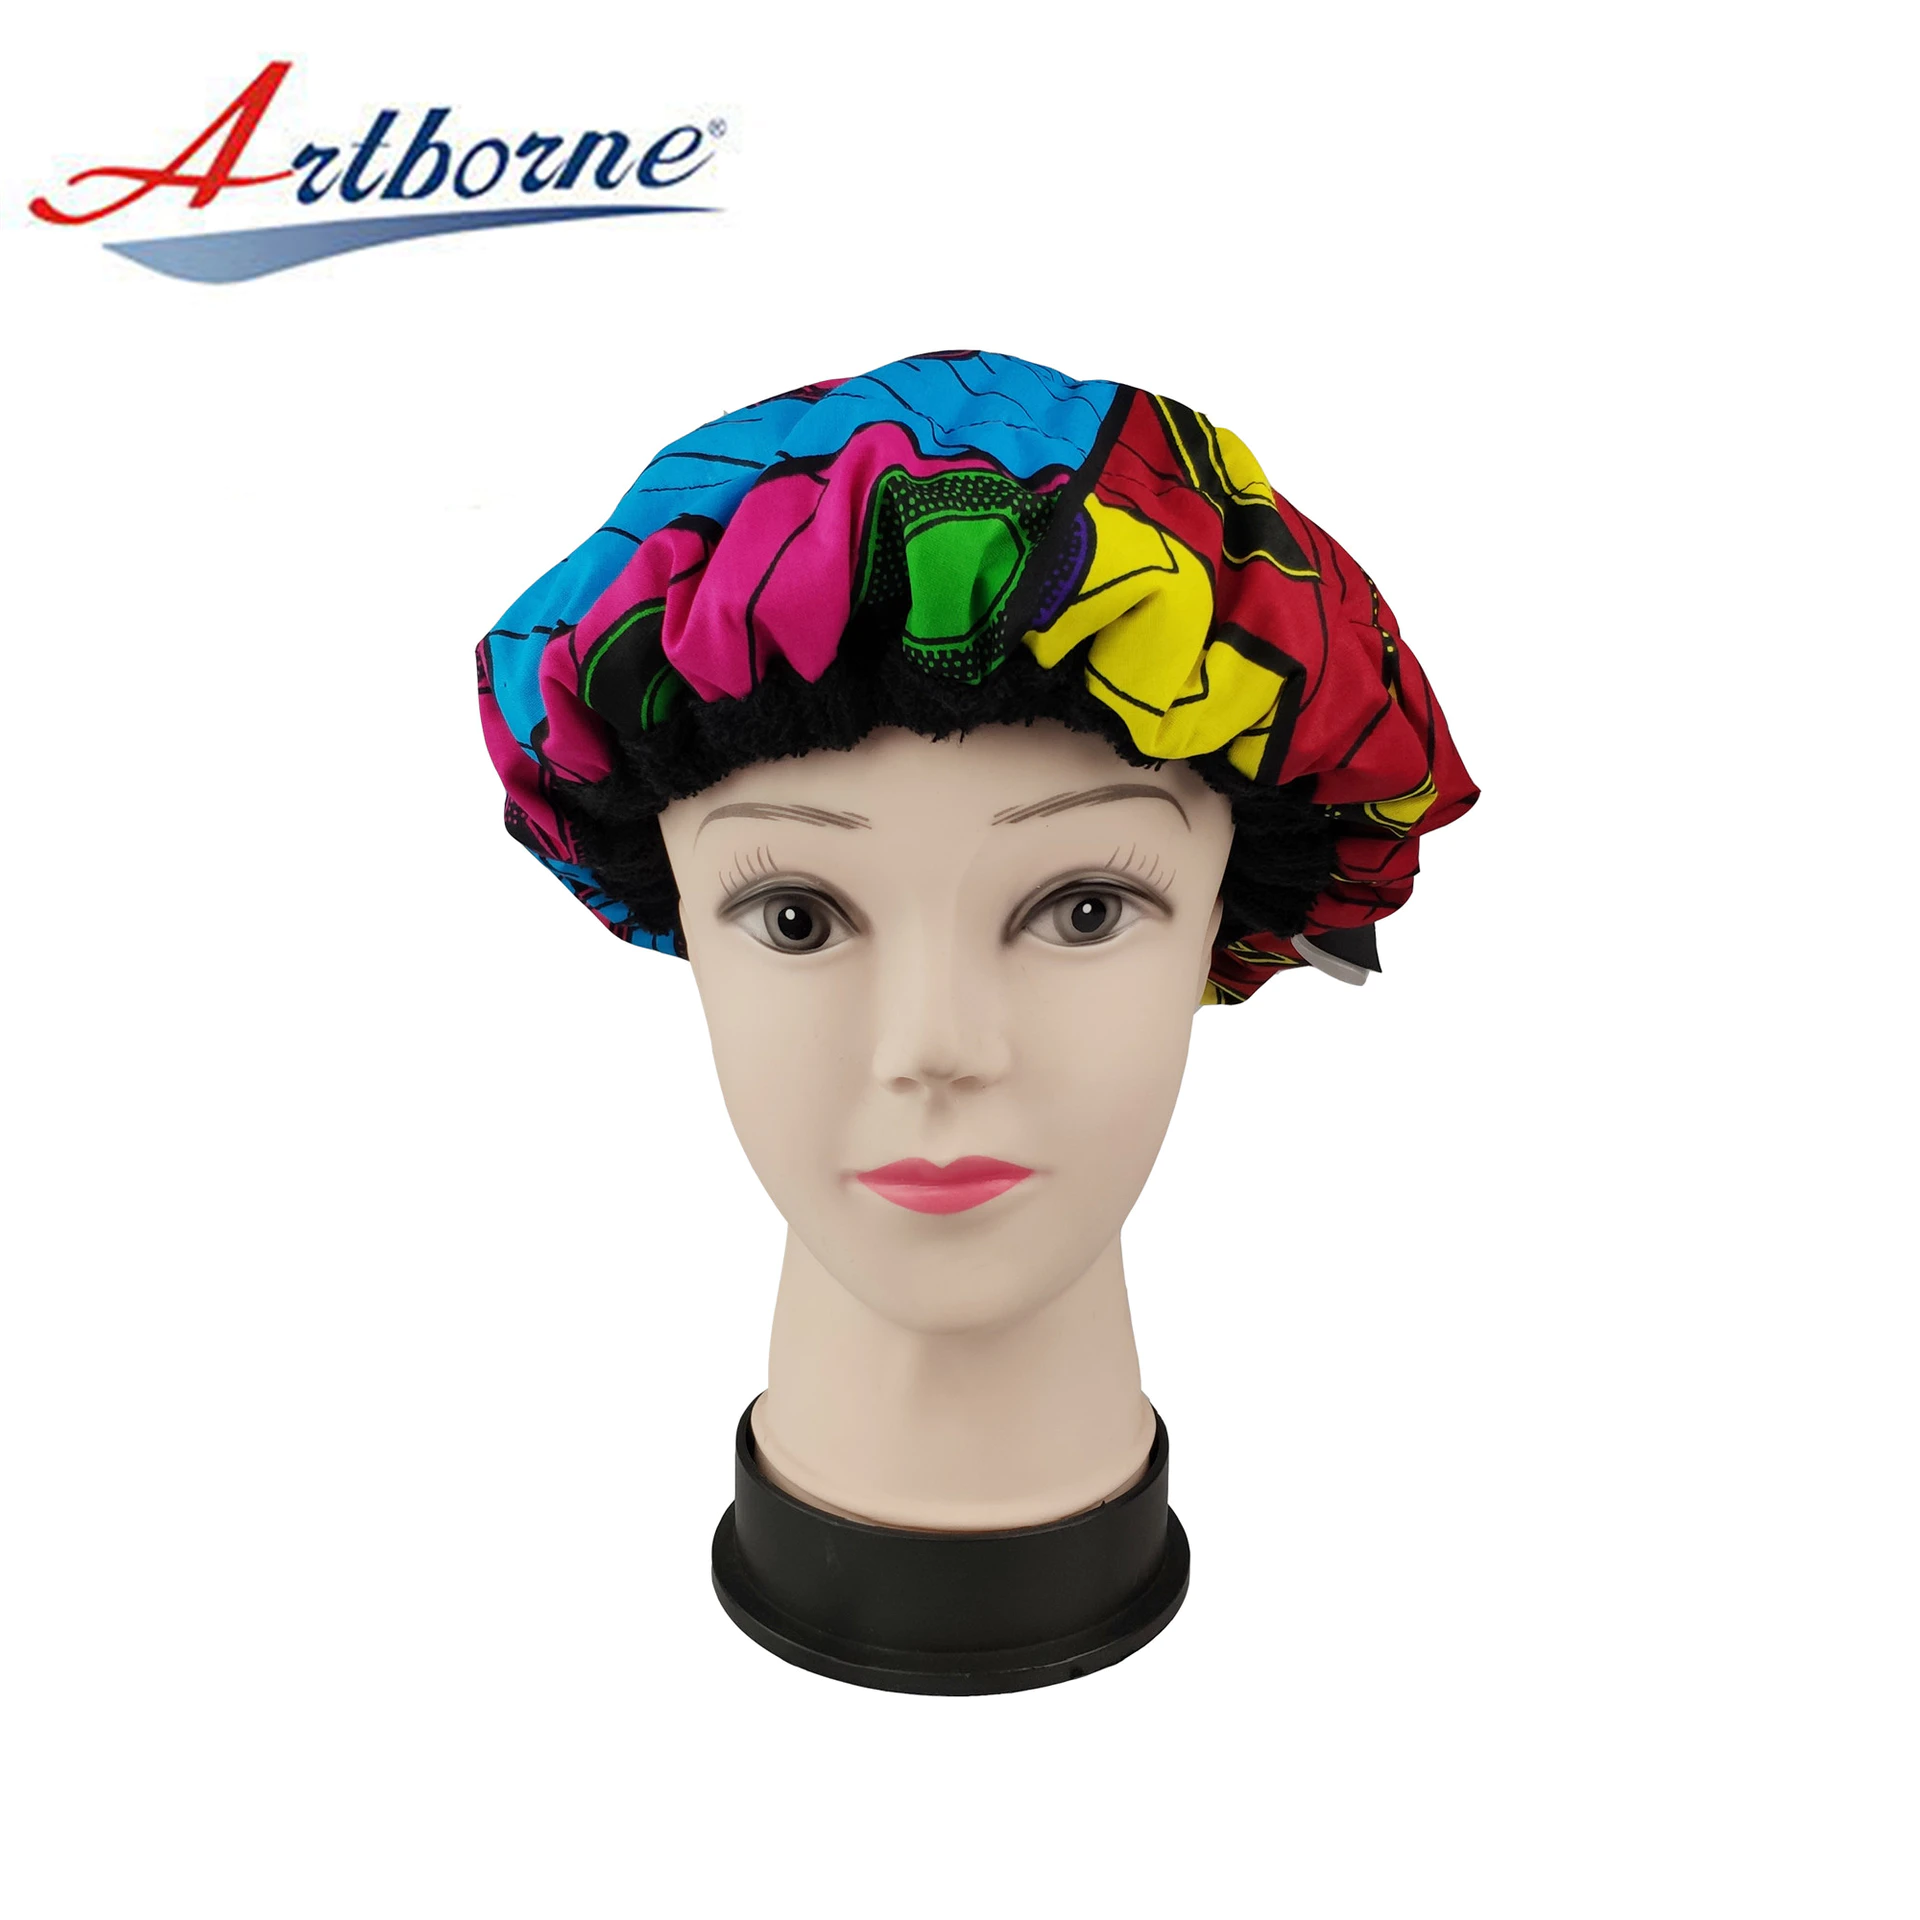 Artborne thermal thermal deep conditioning cap factory for lady-33